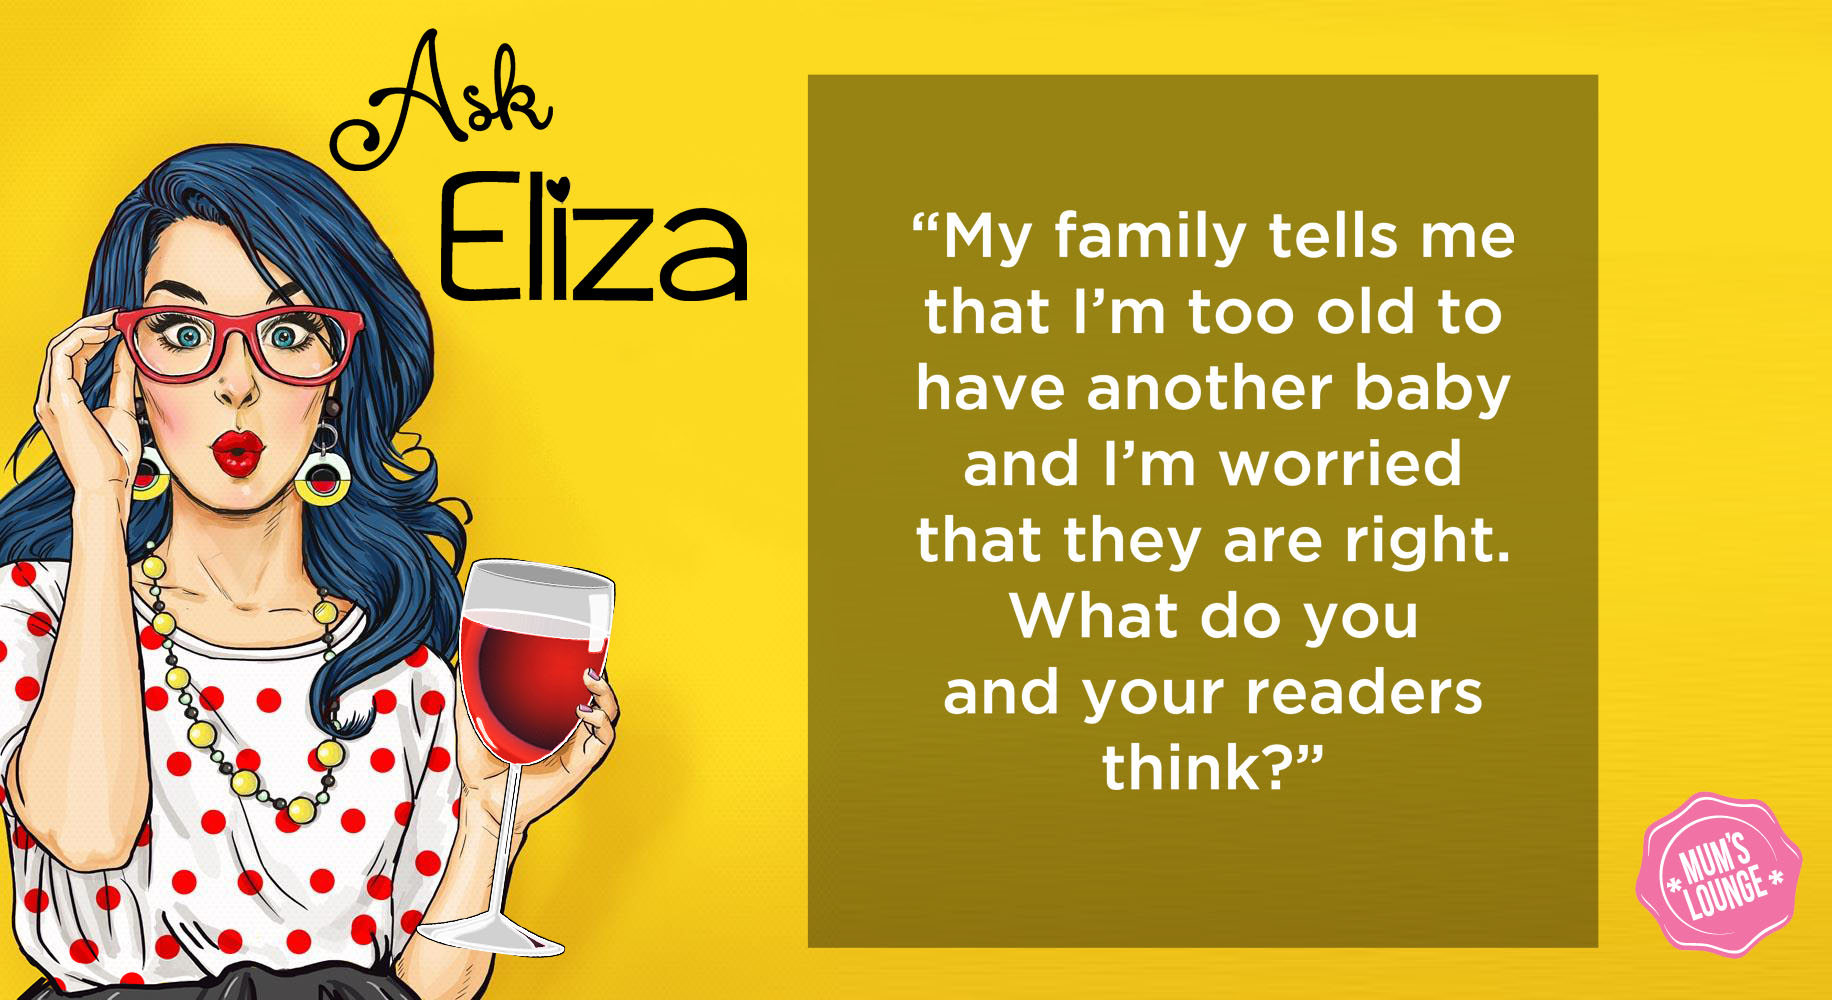 Ask Eliza - "Am I Too Old to Have Another Baby? 